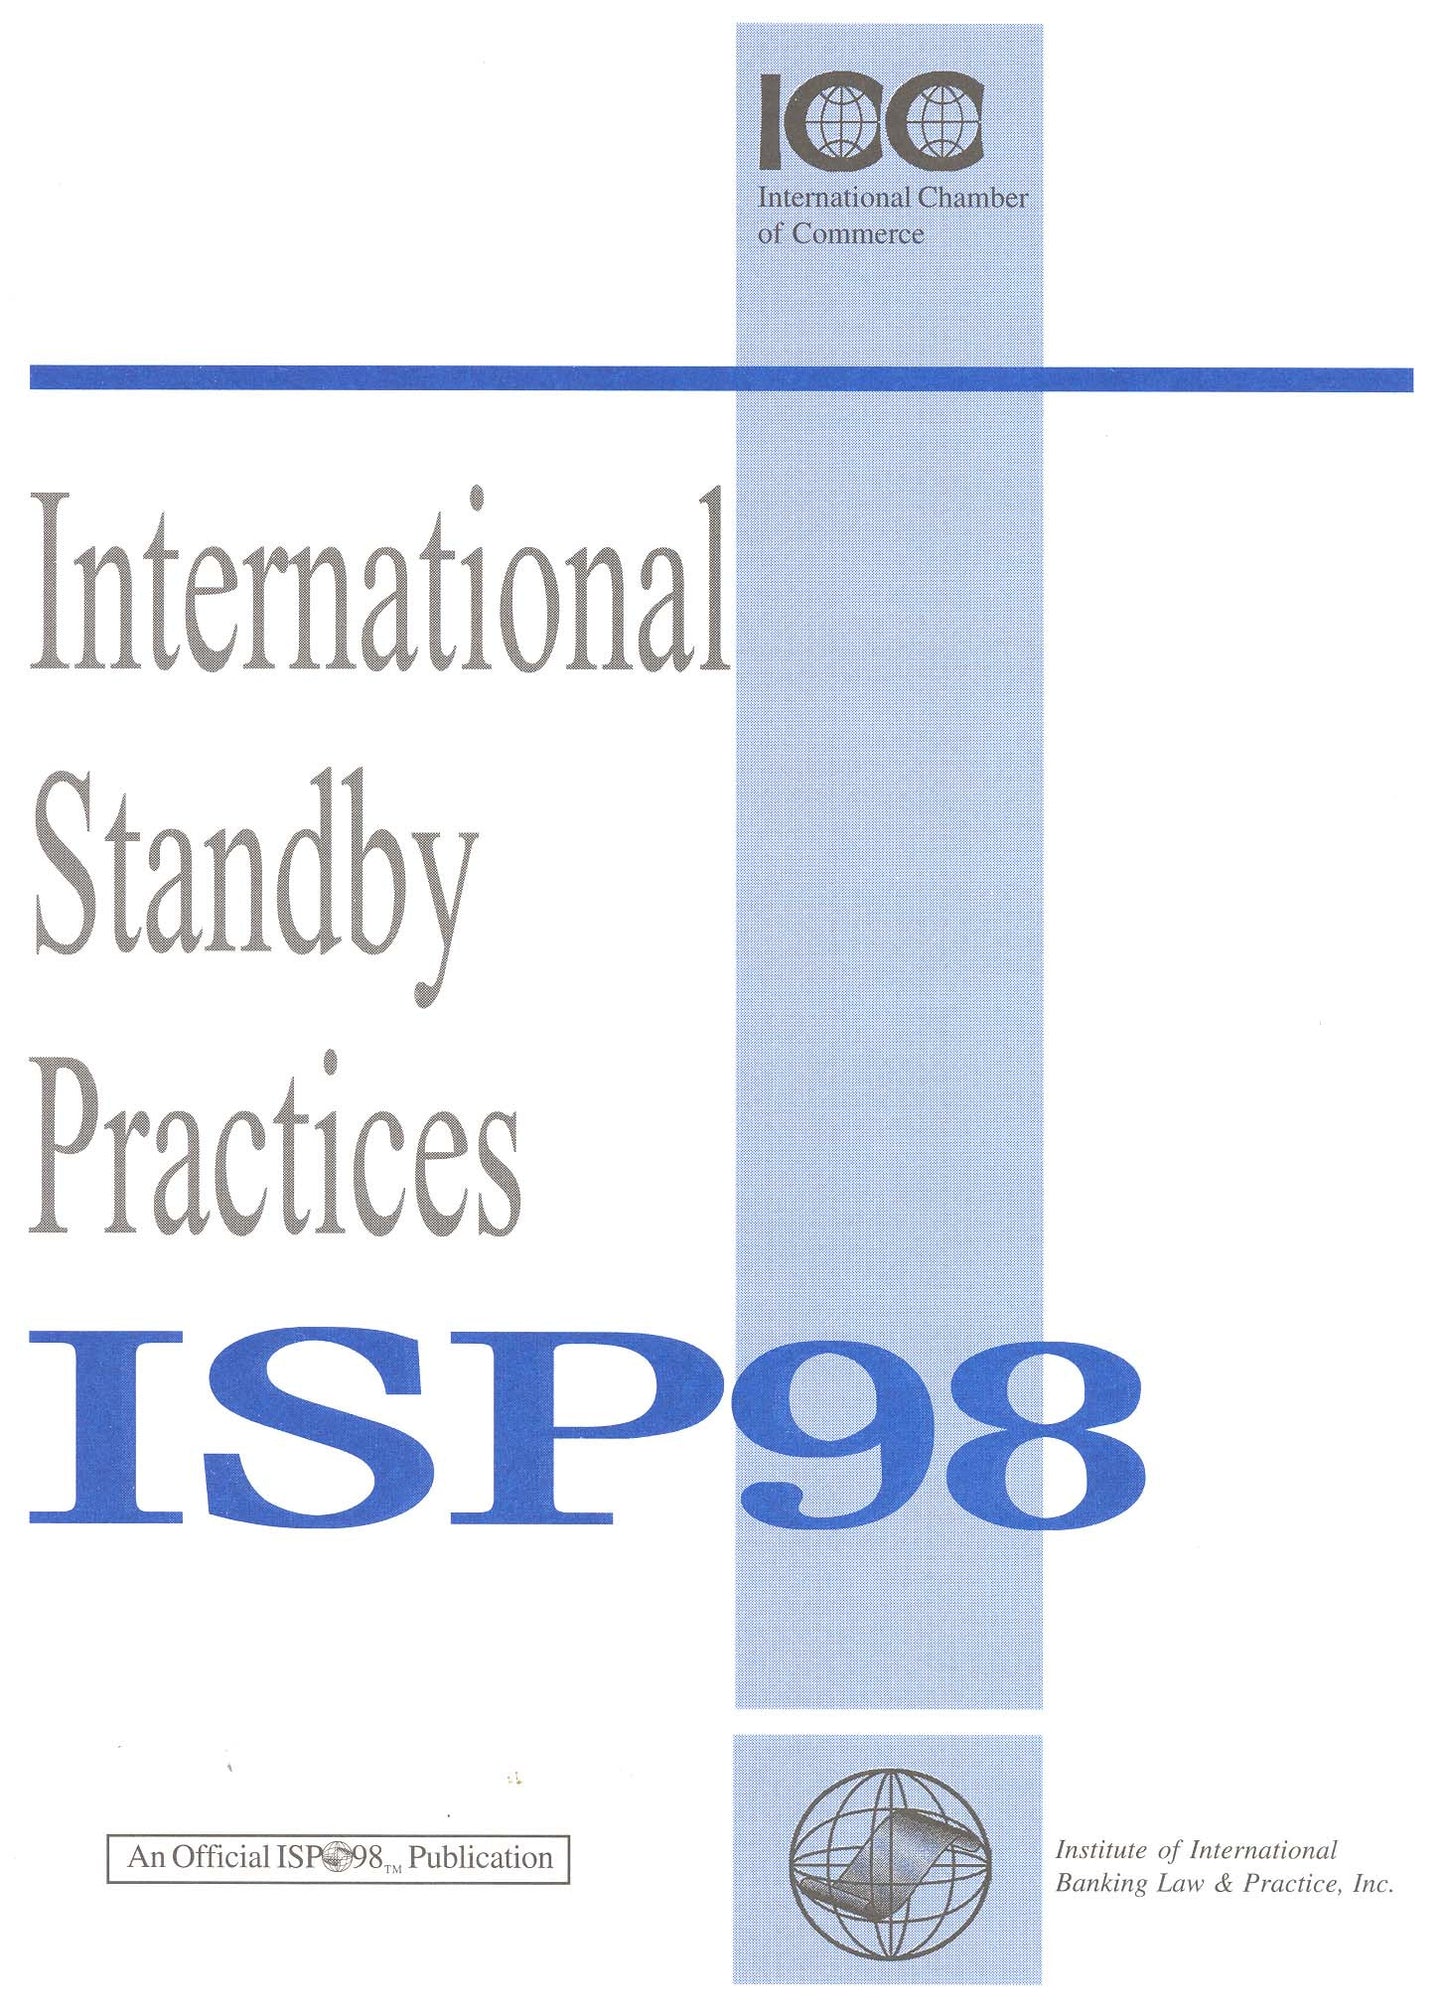 ISP98: The Rules (leaflet)